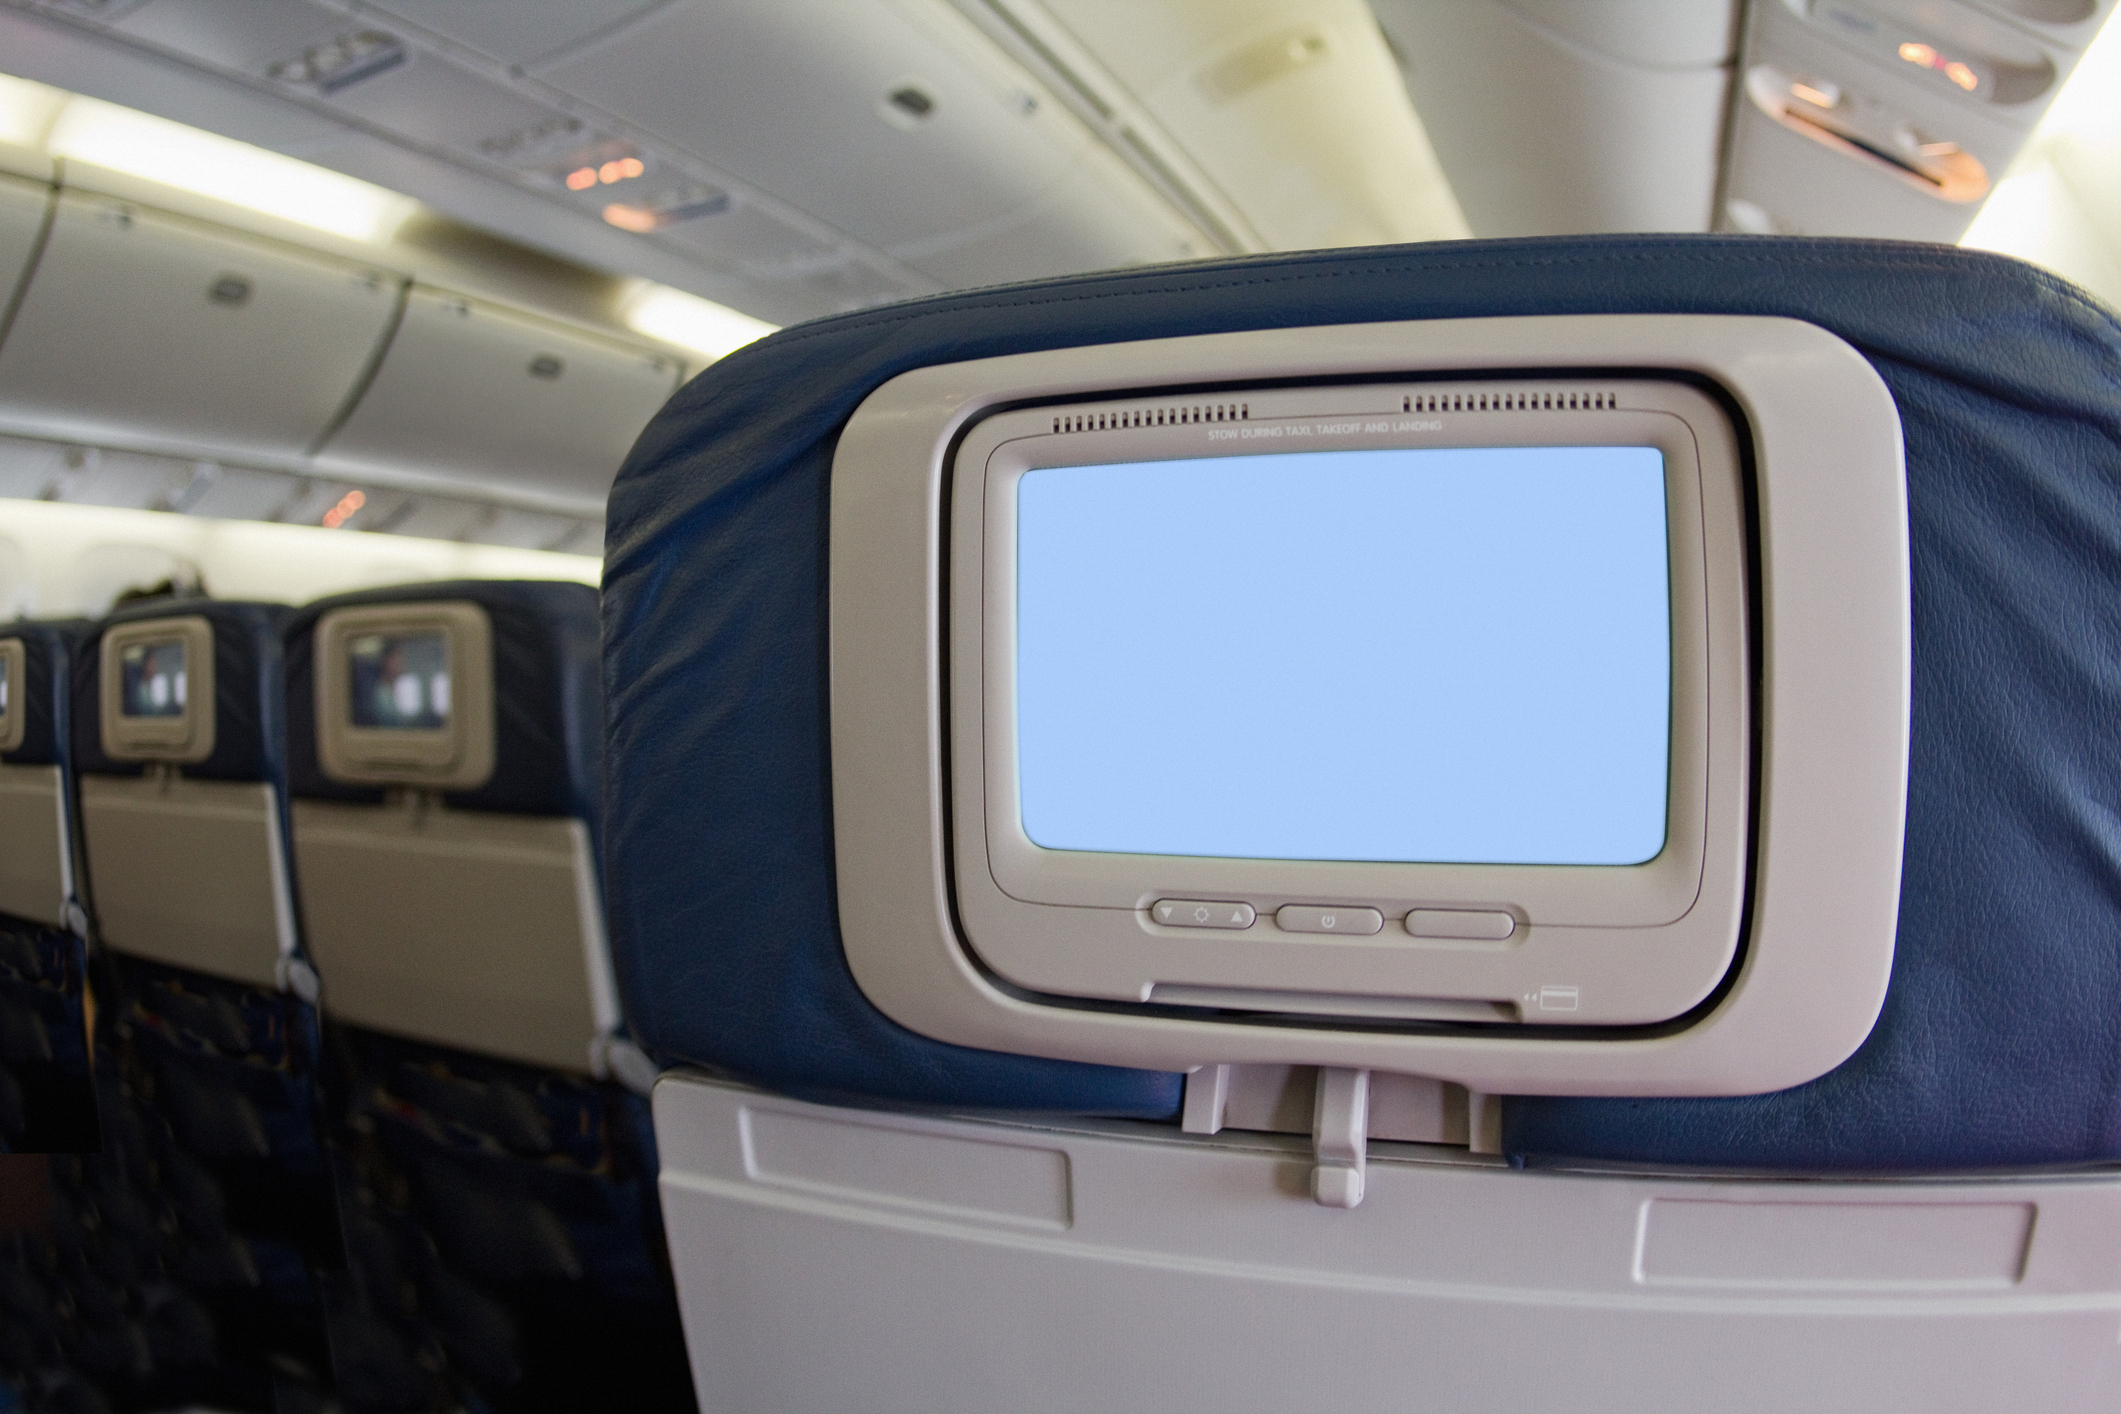 Seatback in-flight entertainment screen turned off on an airplane